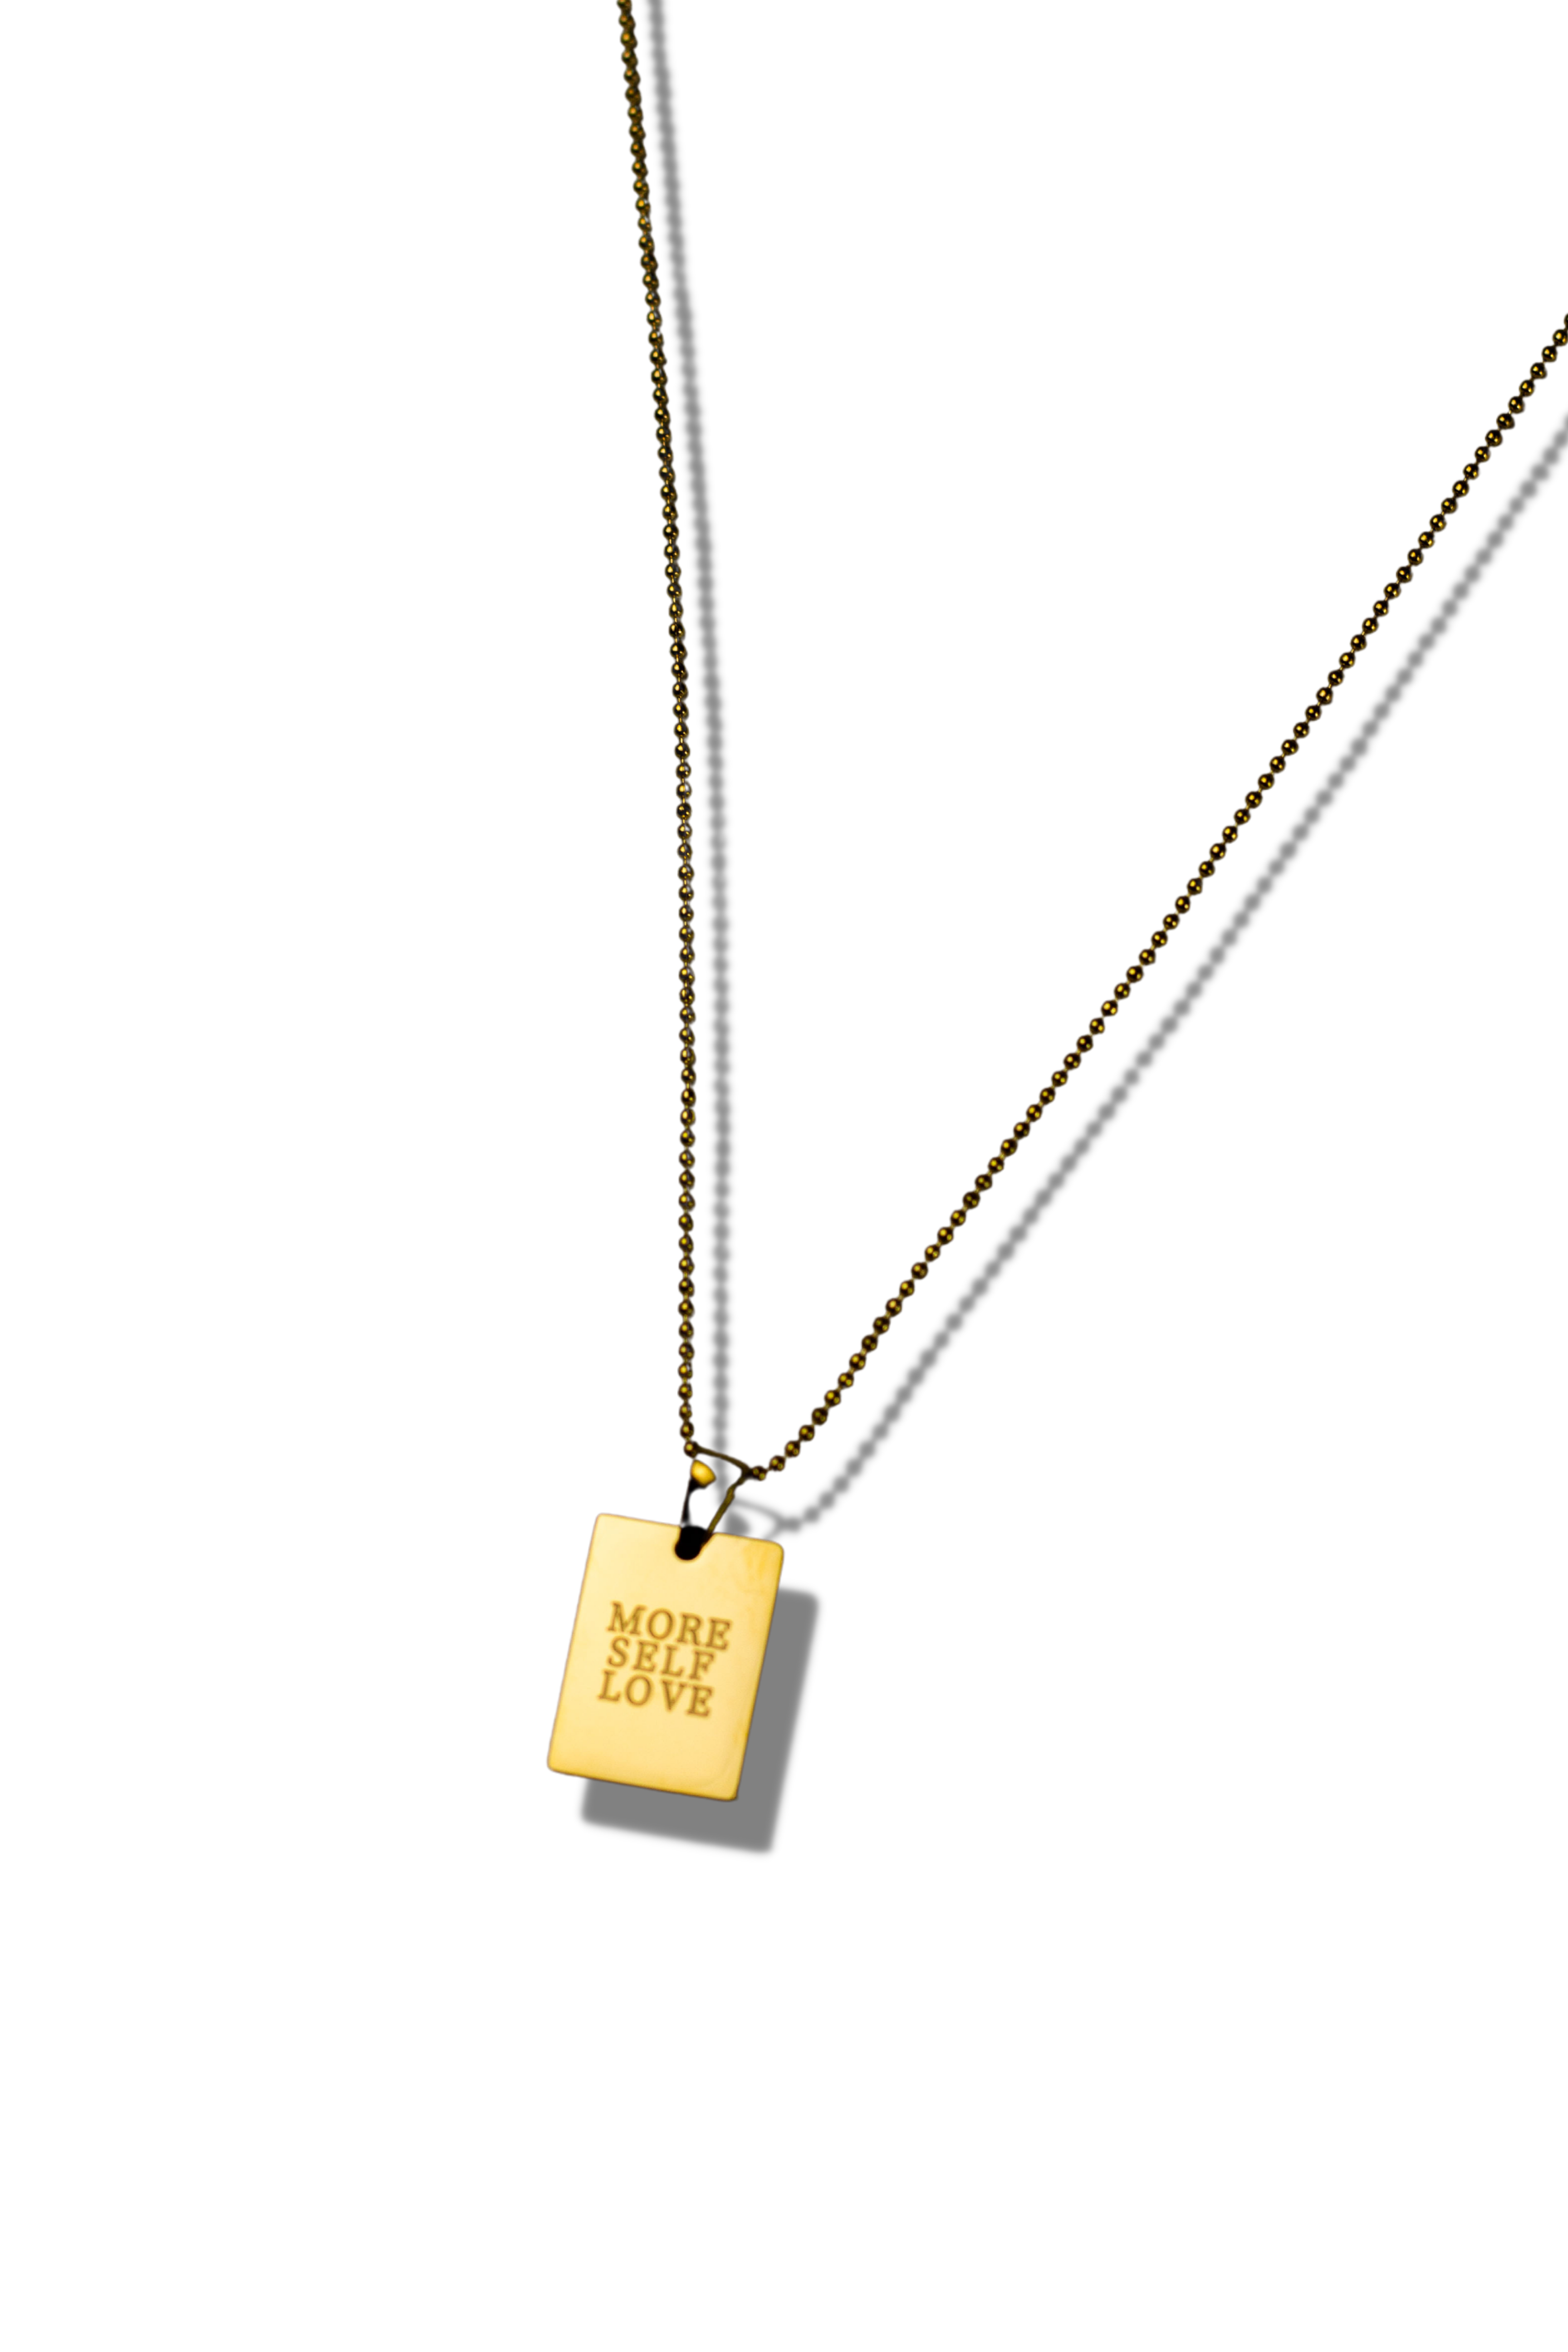 18k gold stainless steel chain necklace. Engraved in the necklace are the words "MORE SELF LOVE". E's Element "More Self Love" Chain Necklace by E's Element.